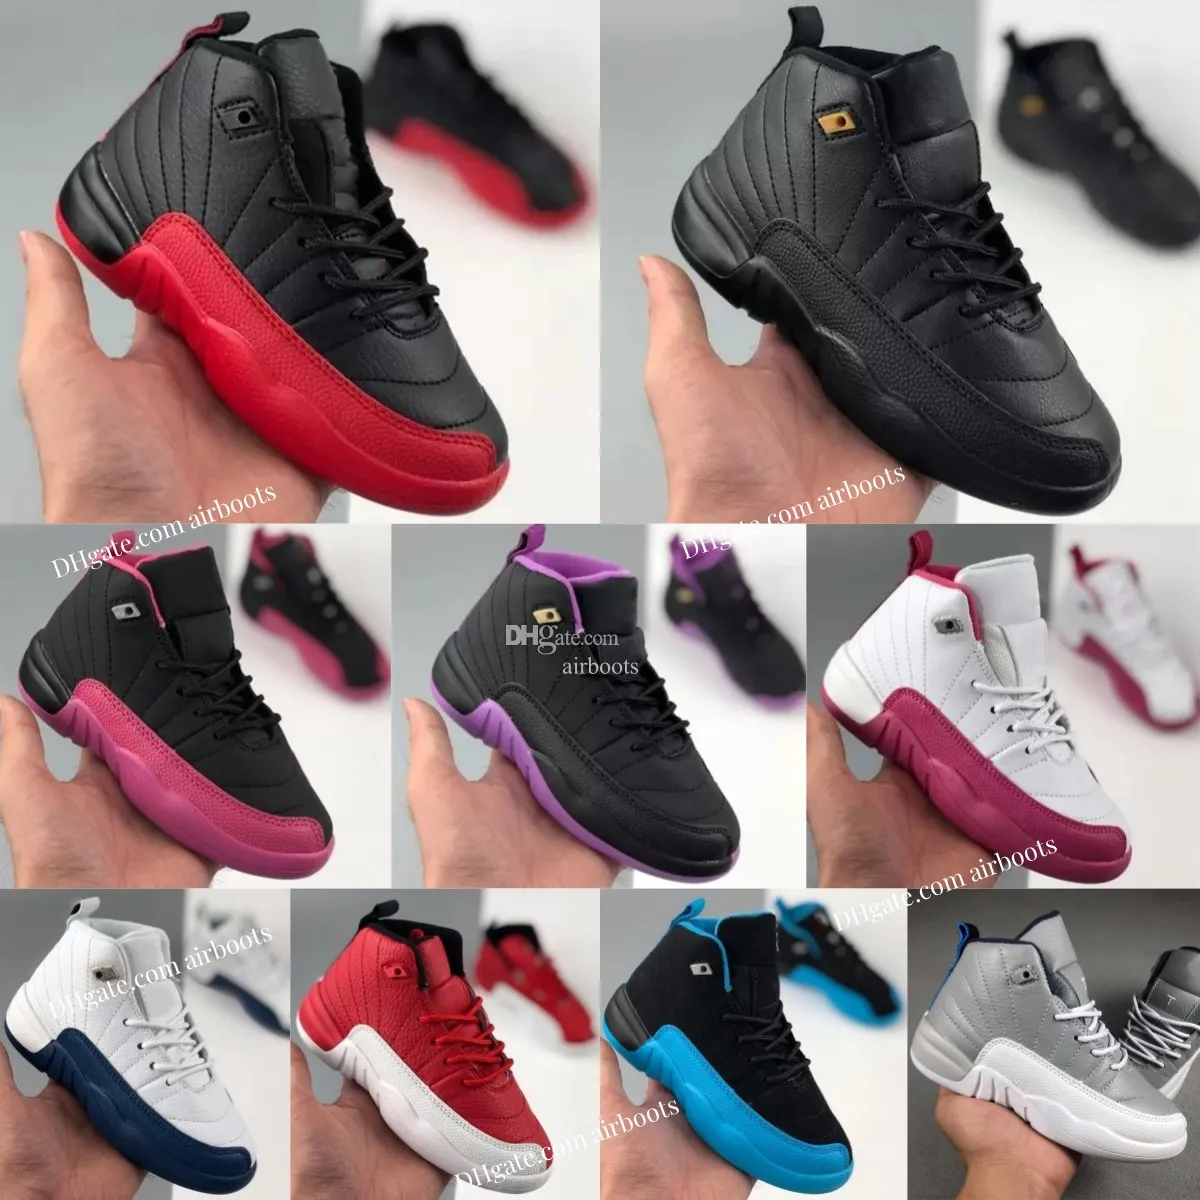 Kids Shoes 12s Basketball 12 Pink Sneakers Toddler Game Red Flu Gym shoe Children Youth Black Taxi Athletic Deadly jumpman XII Sneaker Boys Girls Trainers Gamma Blue